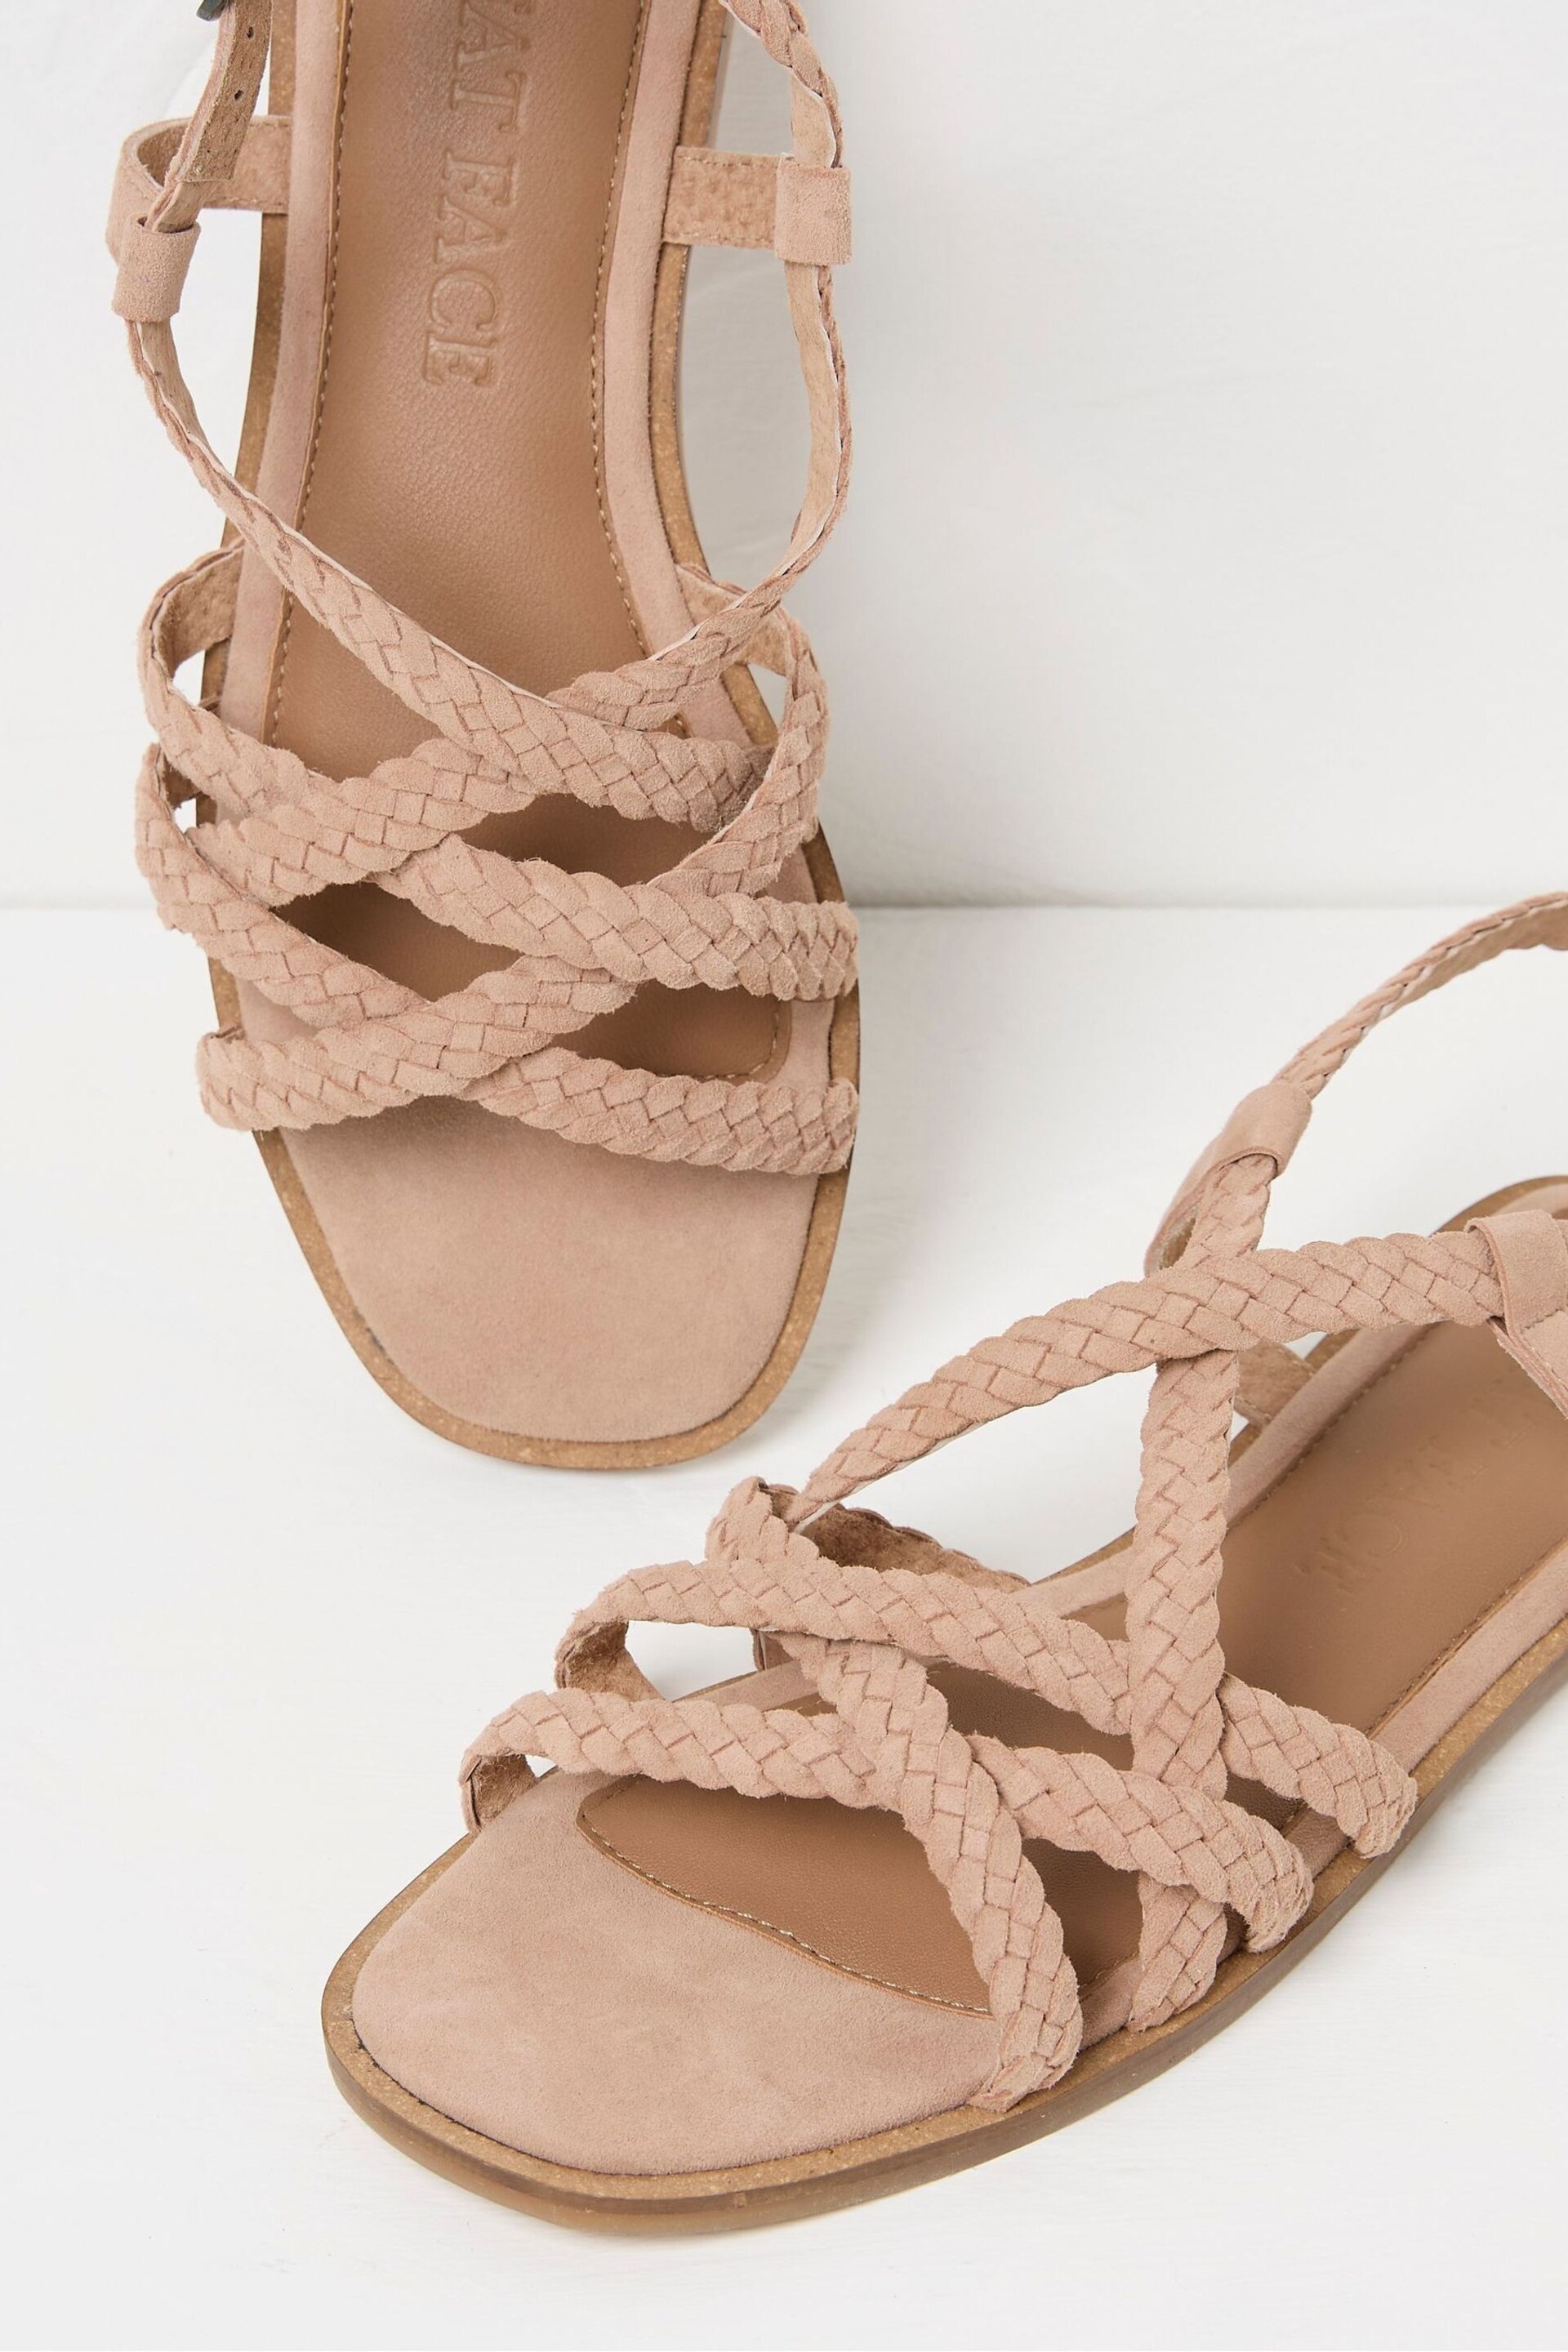 FatFace Pink Suede Strap Sandals - Image 3 of 3